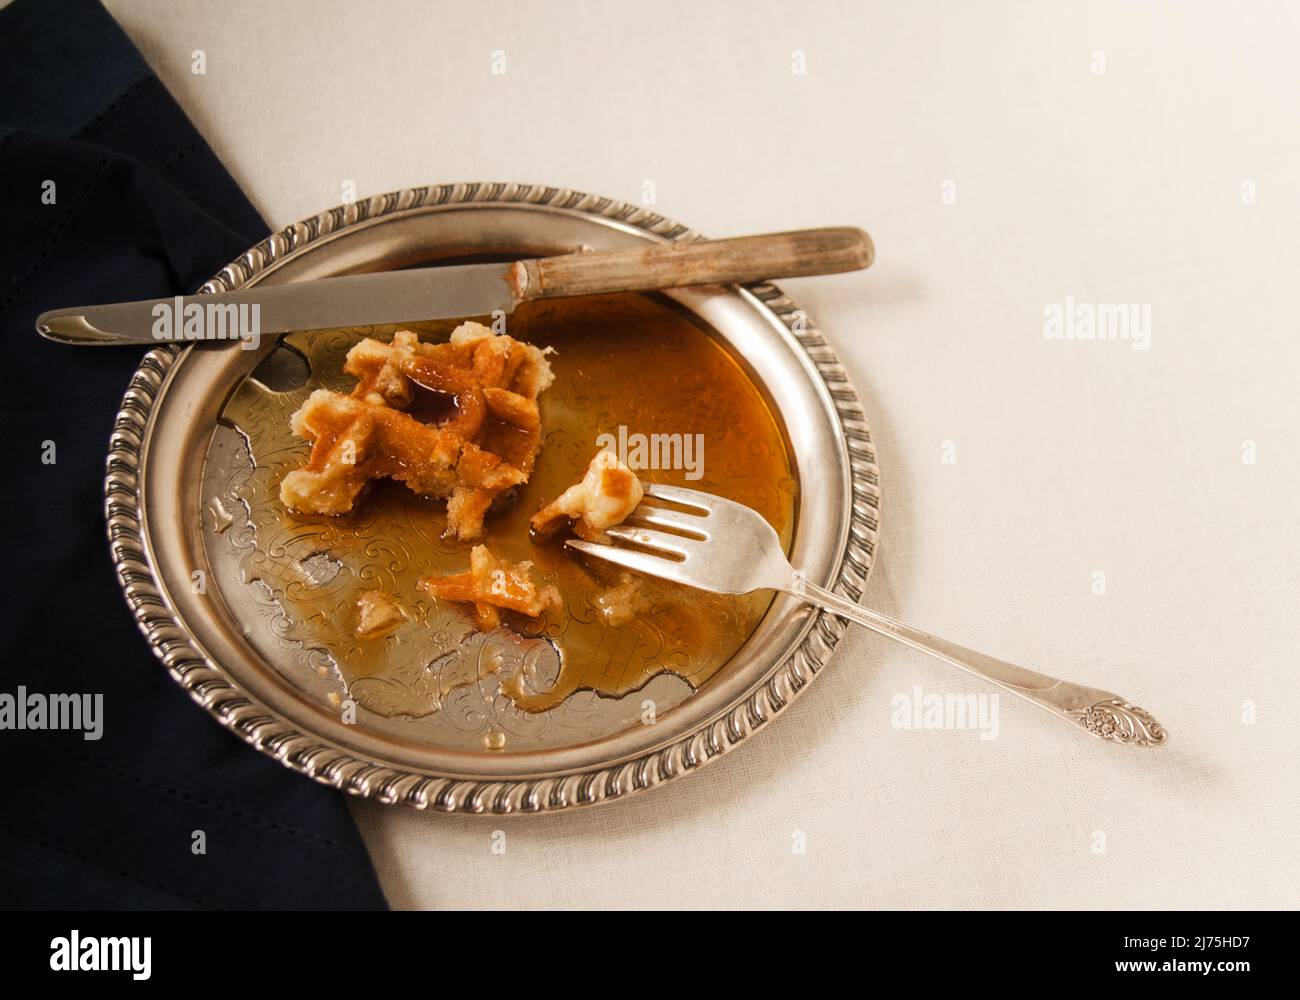 Half eaten waffles with syrup Stock Photo